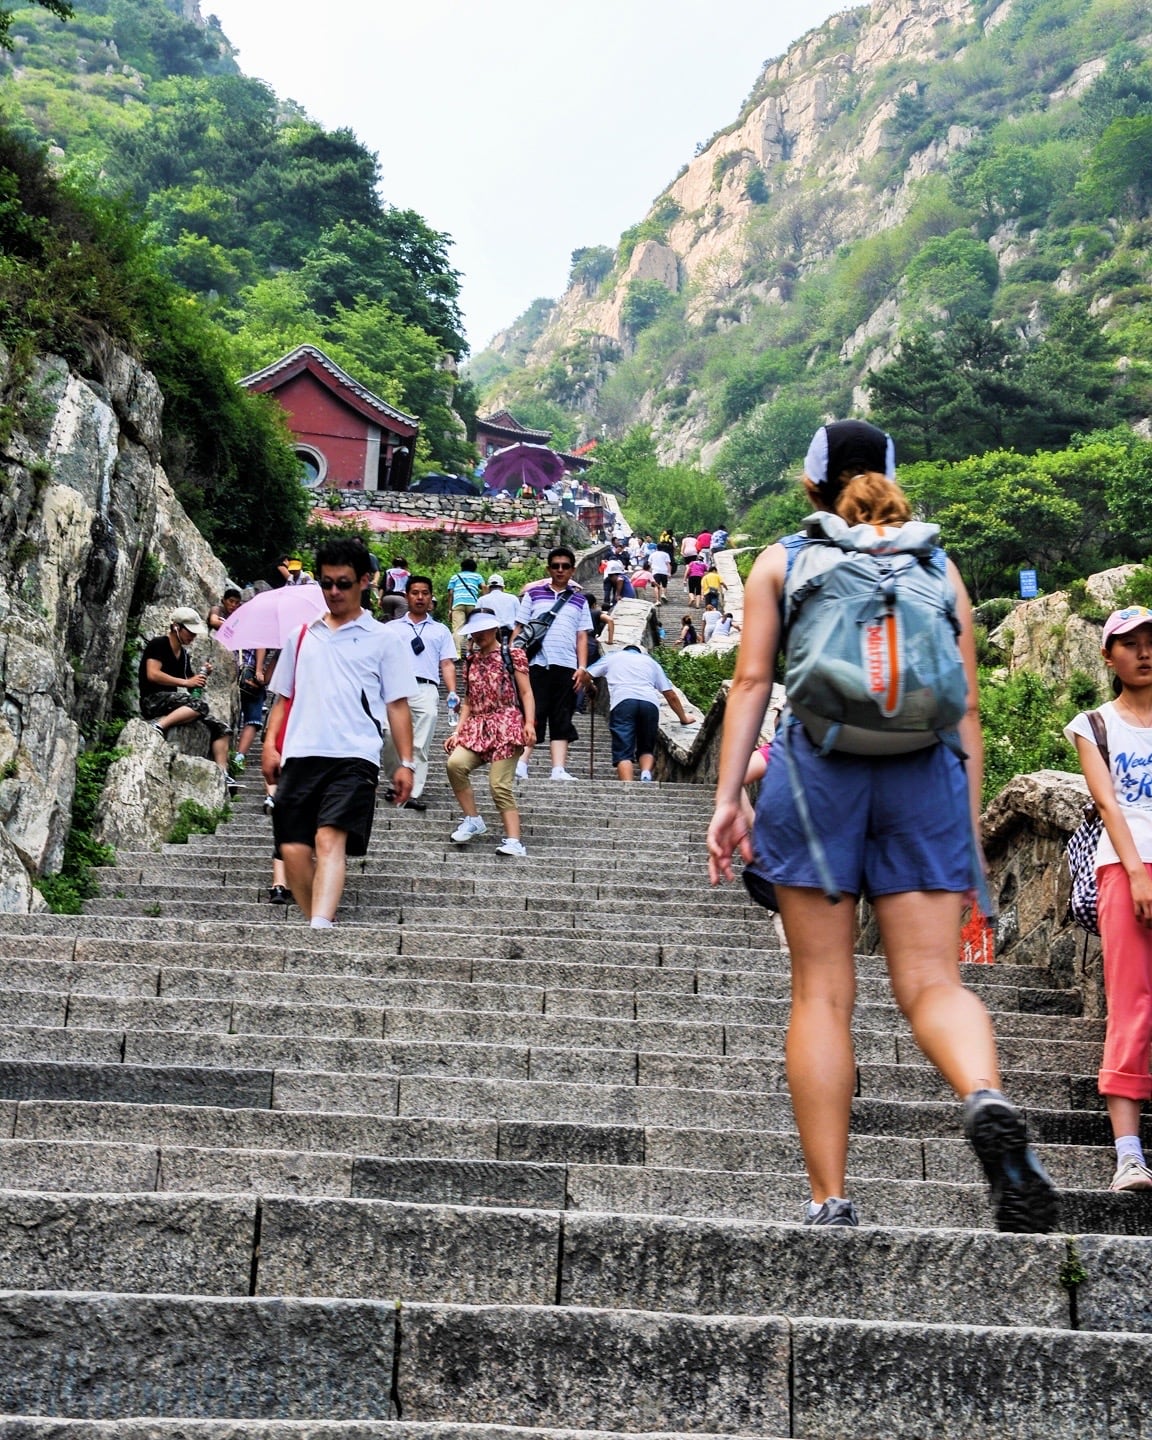 crowds climbing long set of stairs on a mountain